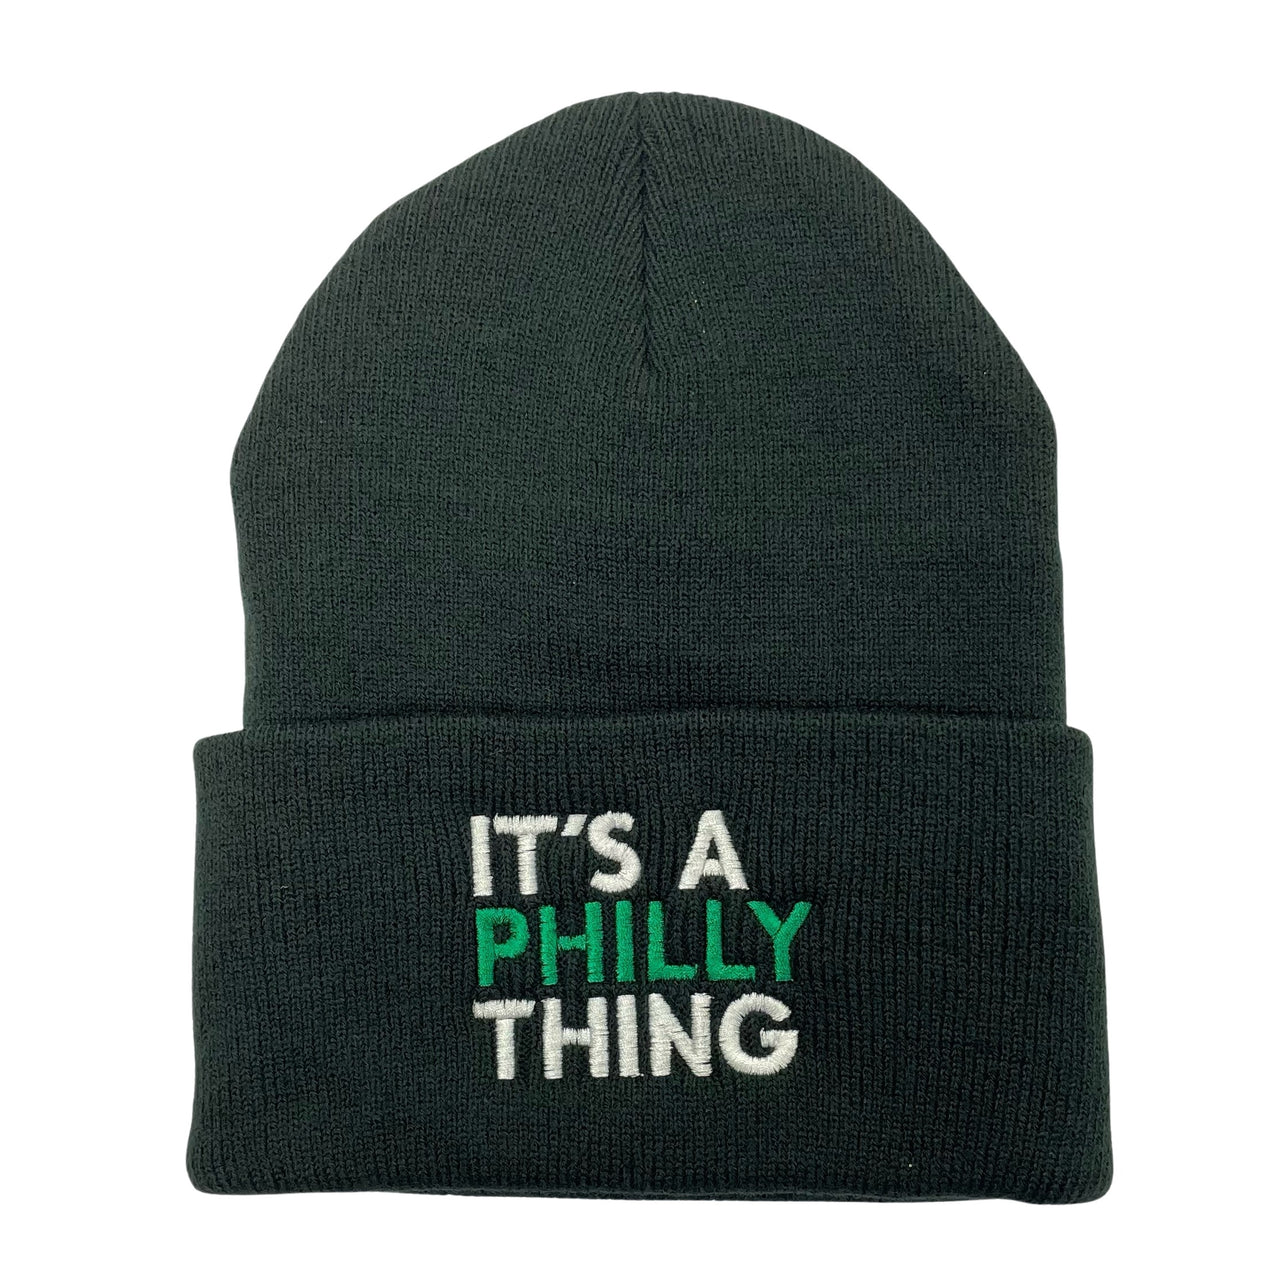 Philadelphia "It's a Philly Thing" Eagles Winter Knit Hat